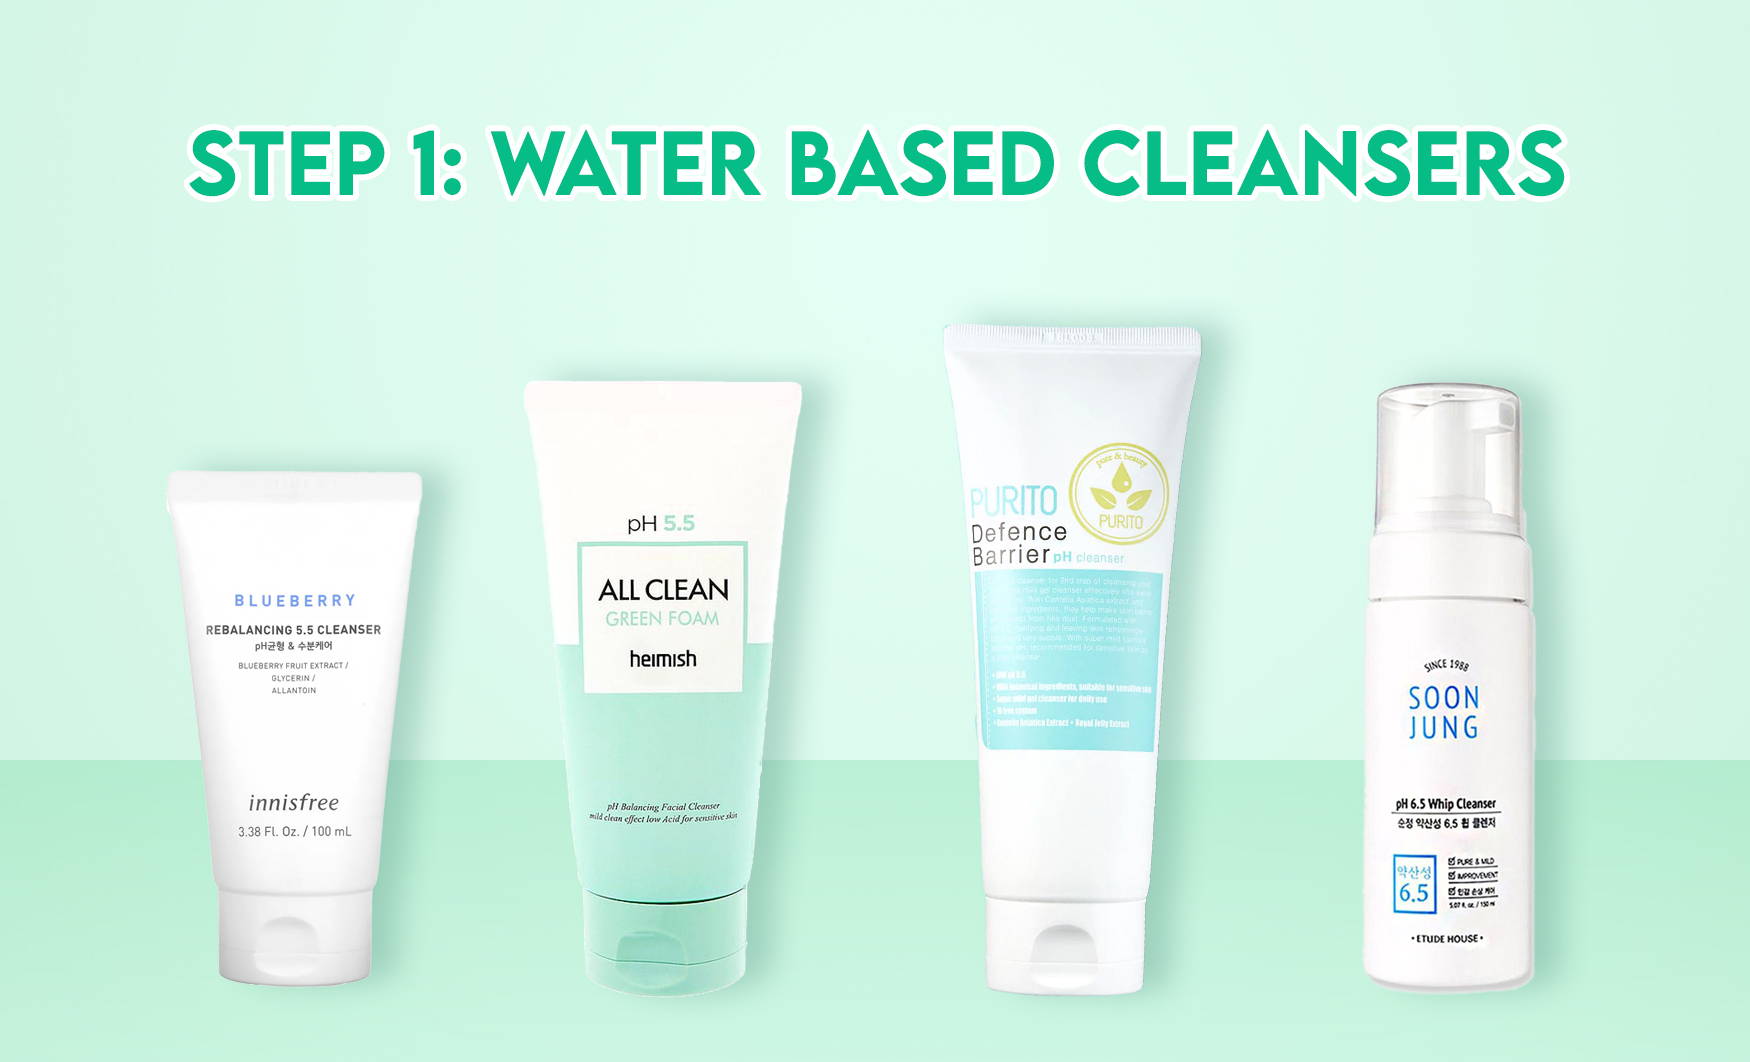 Step 1: Water Based Cleansers.